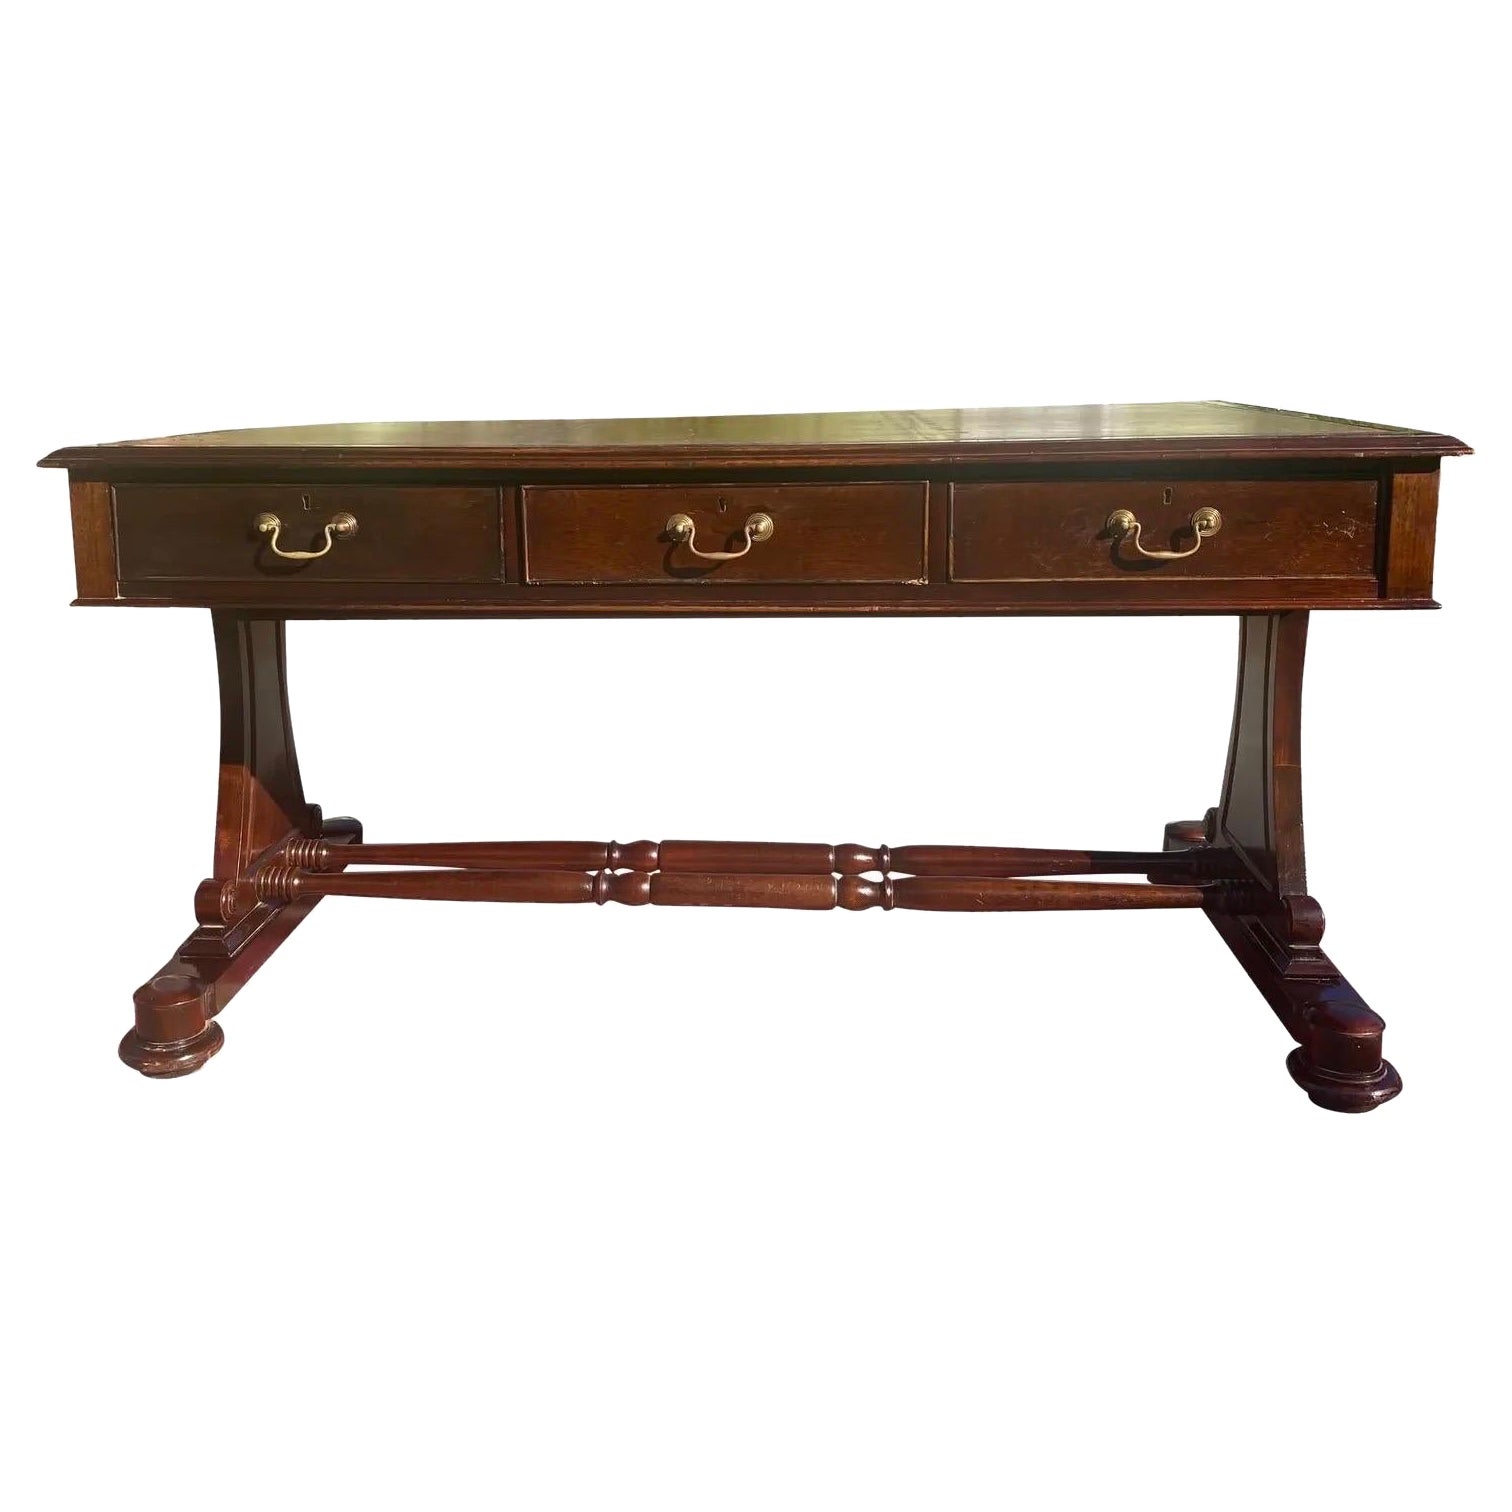 19th Century English Regency Mahogany Leather Top Writing Desk For Sale